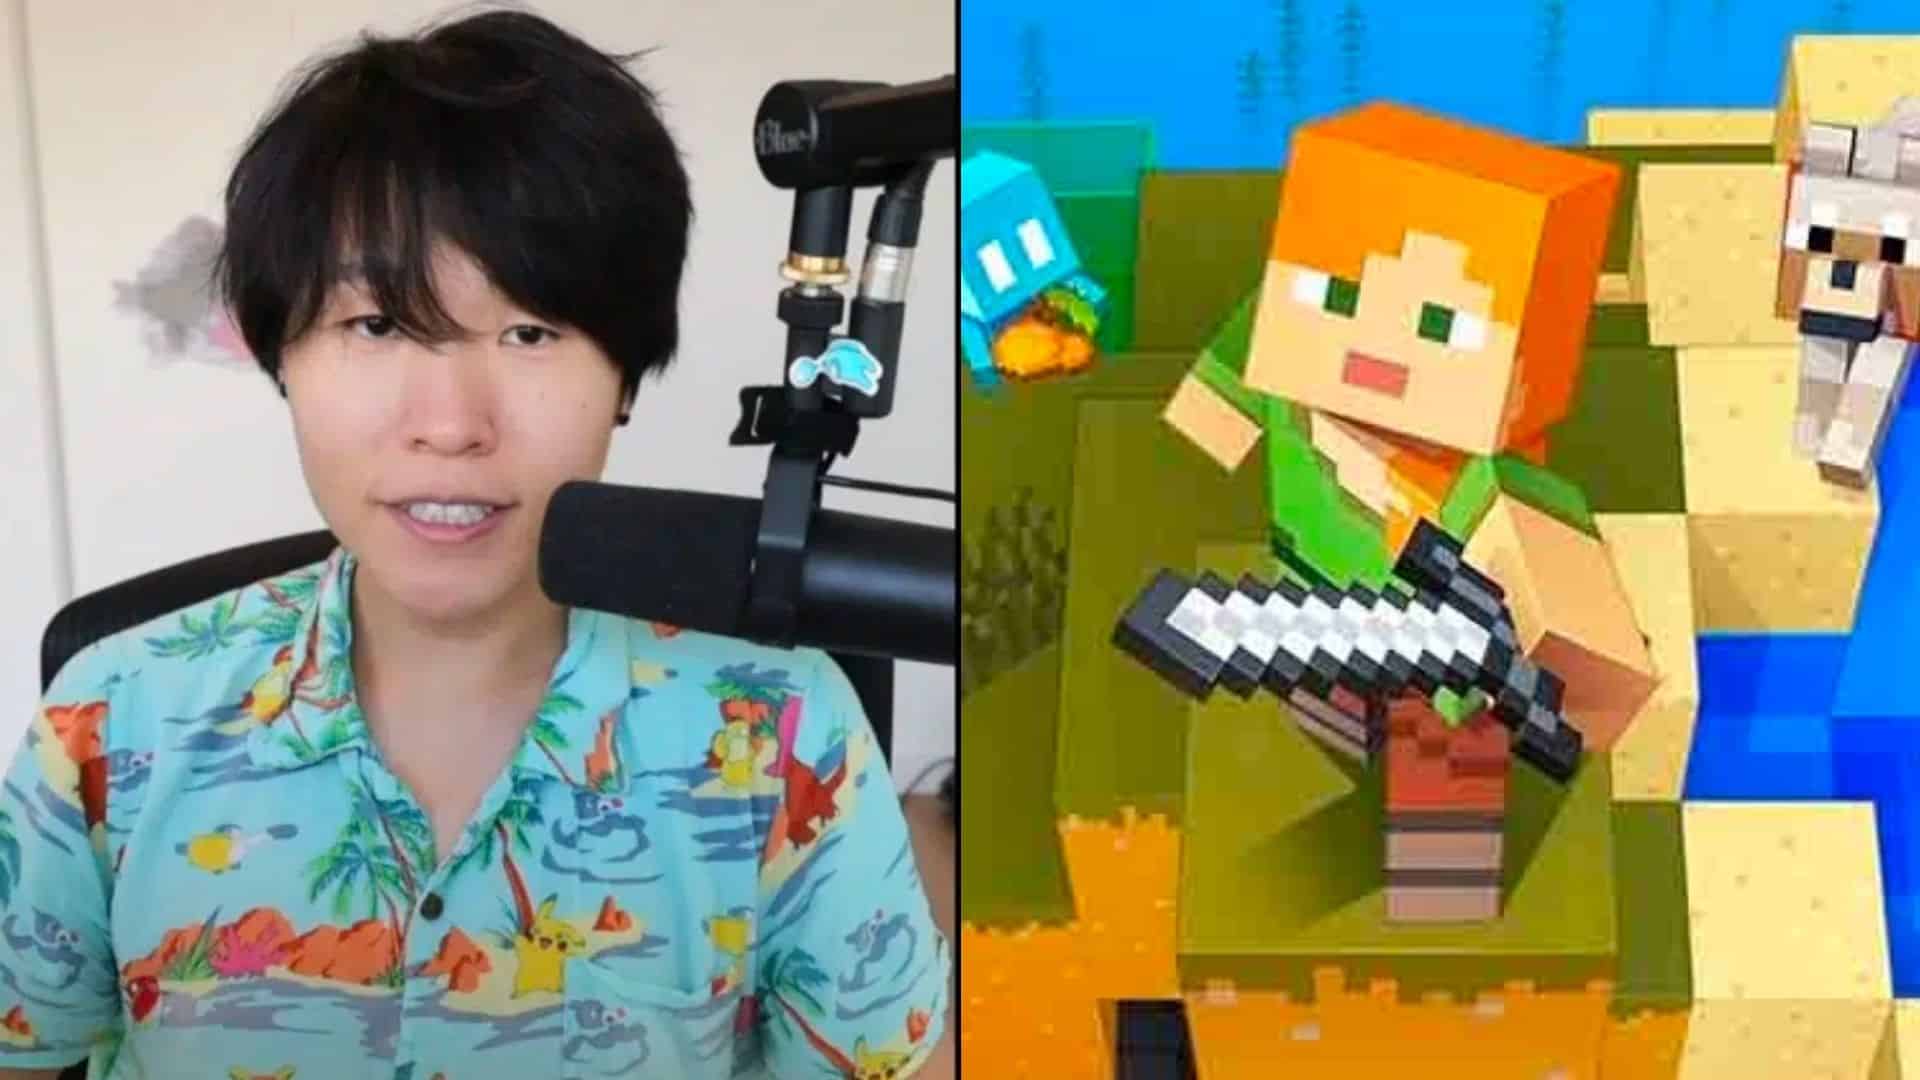 Disguised Toast side-by-side with Minecraft character holding sword